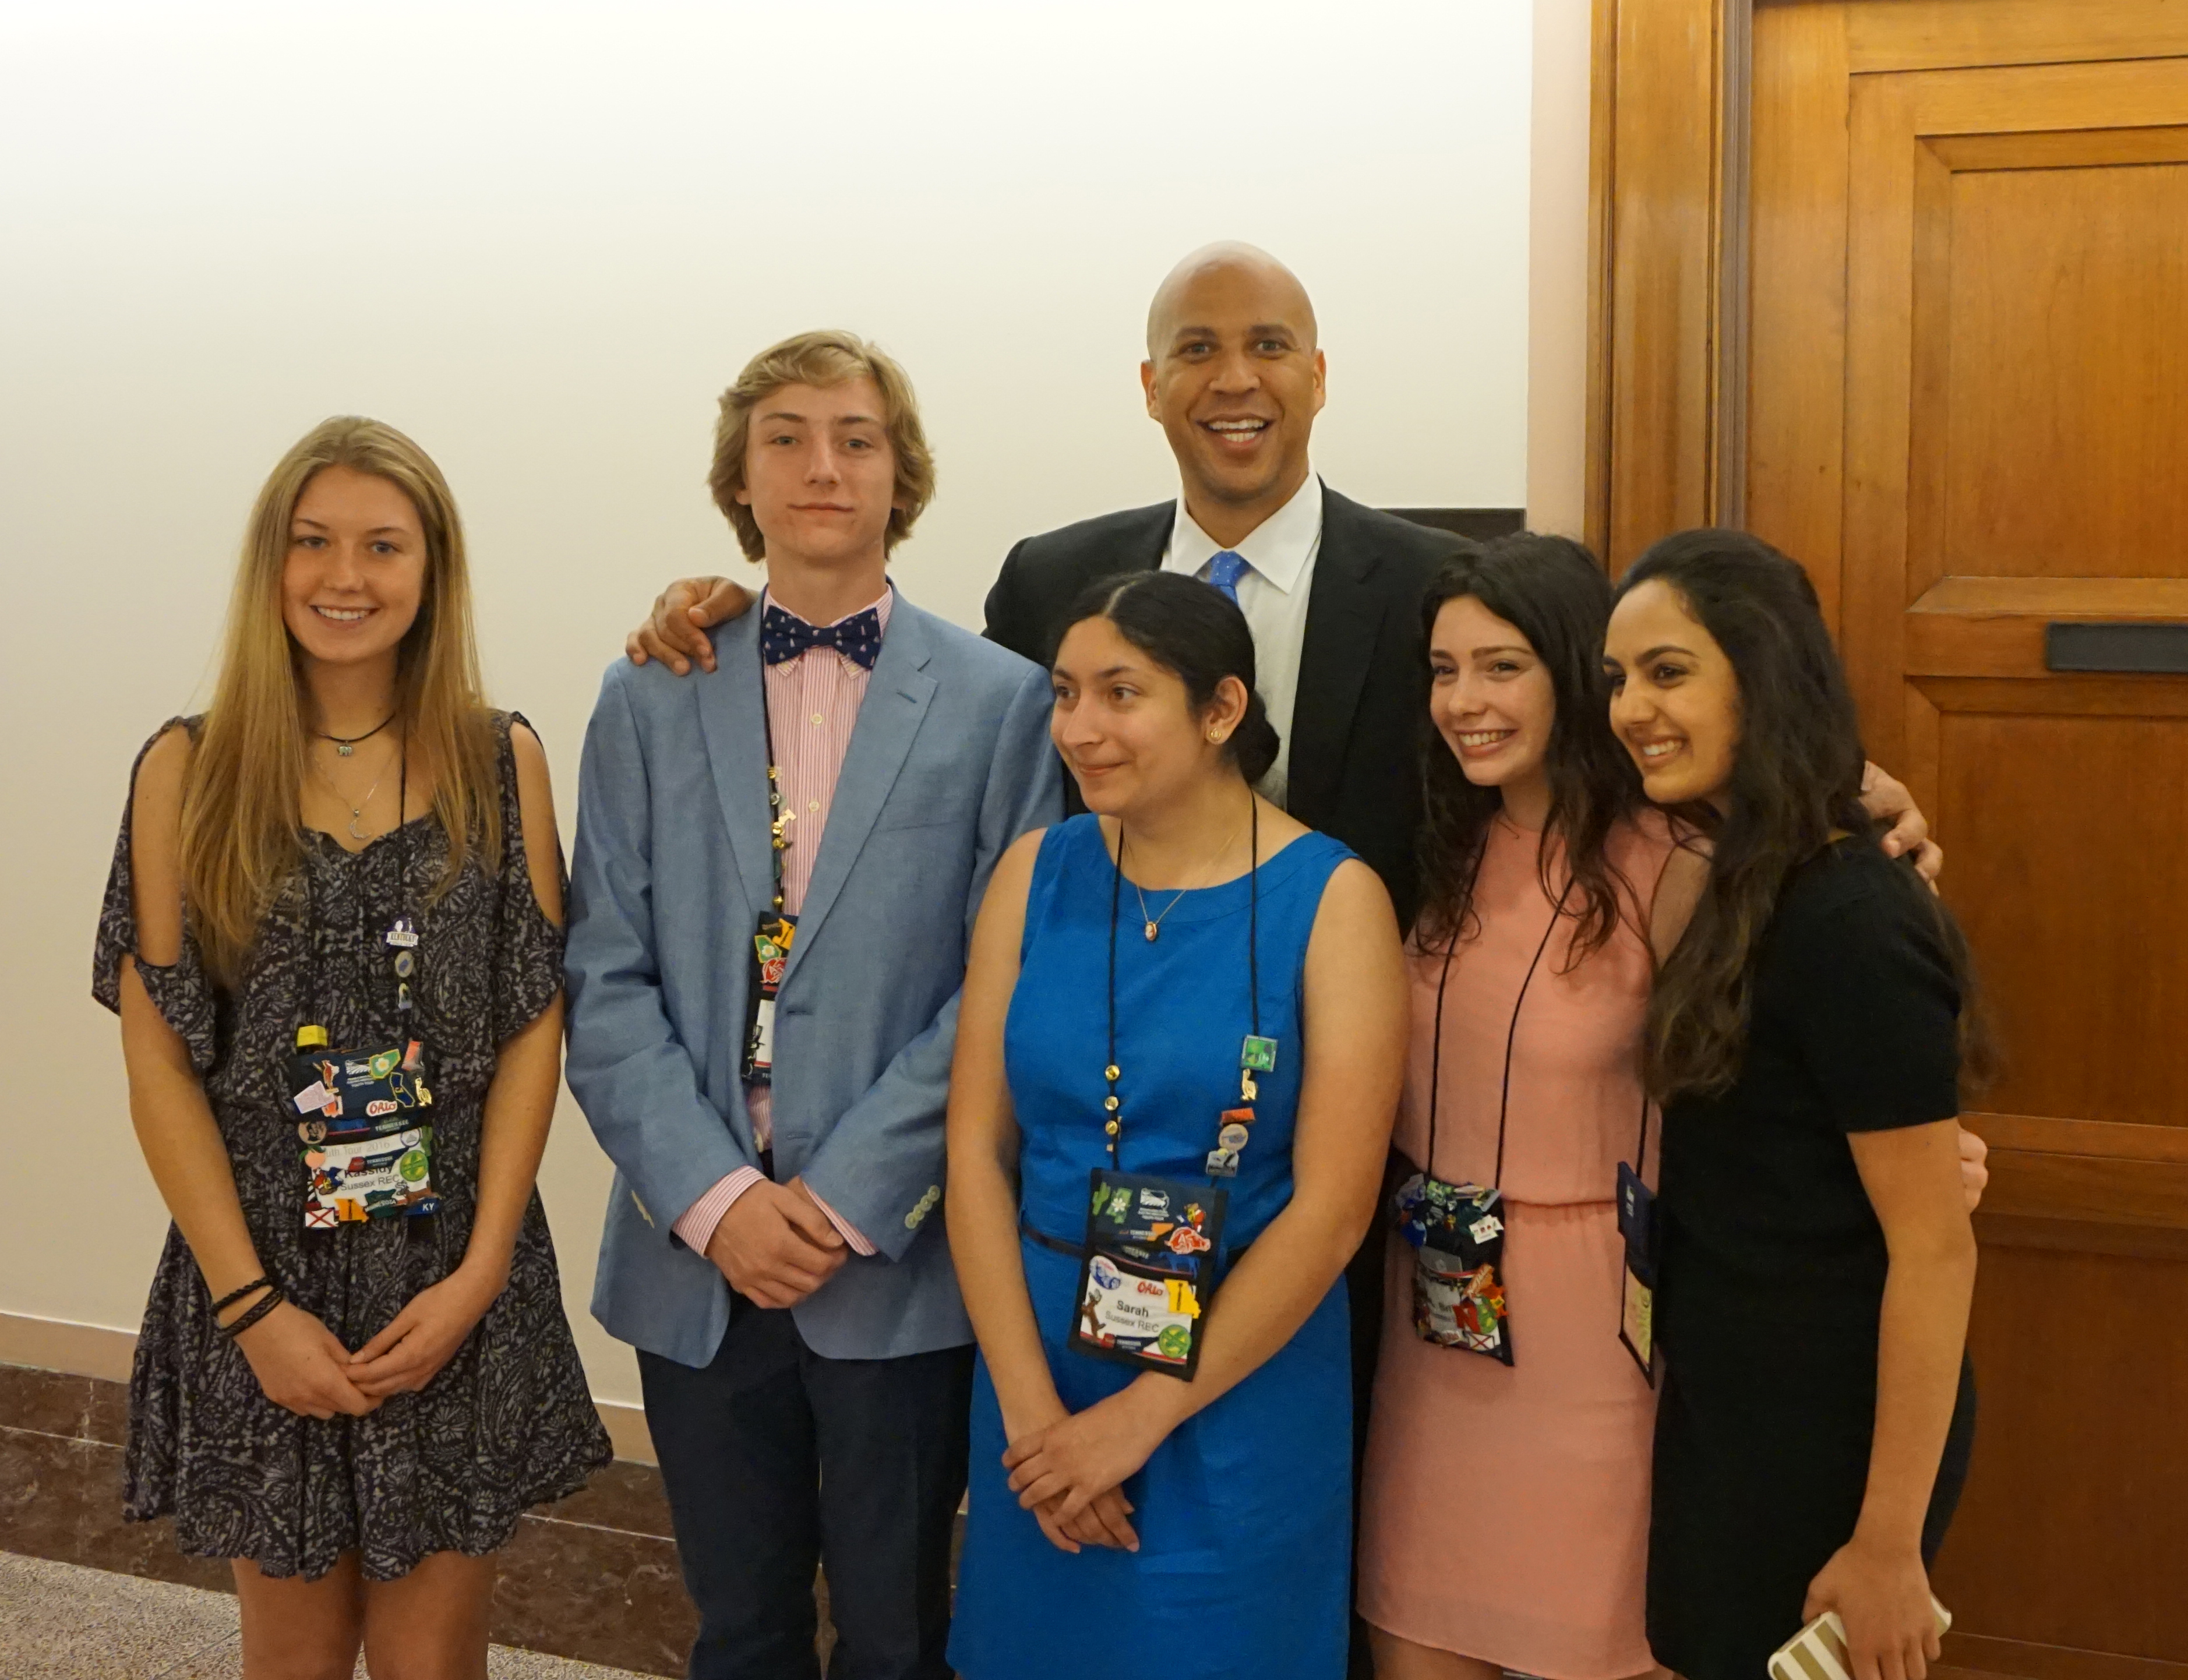 A group of New Jersey students on Youth Tour in 2016 pose with NJ Senator Cory Booker